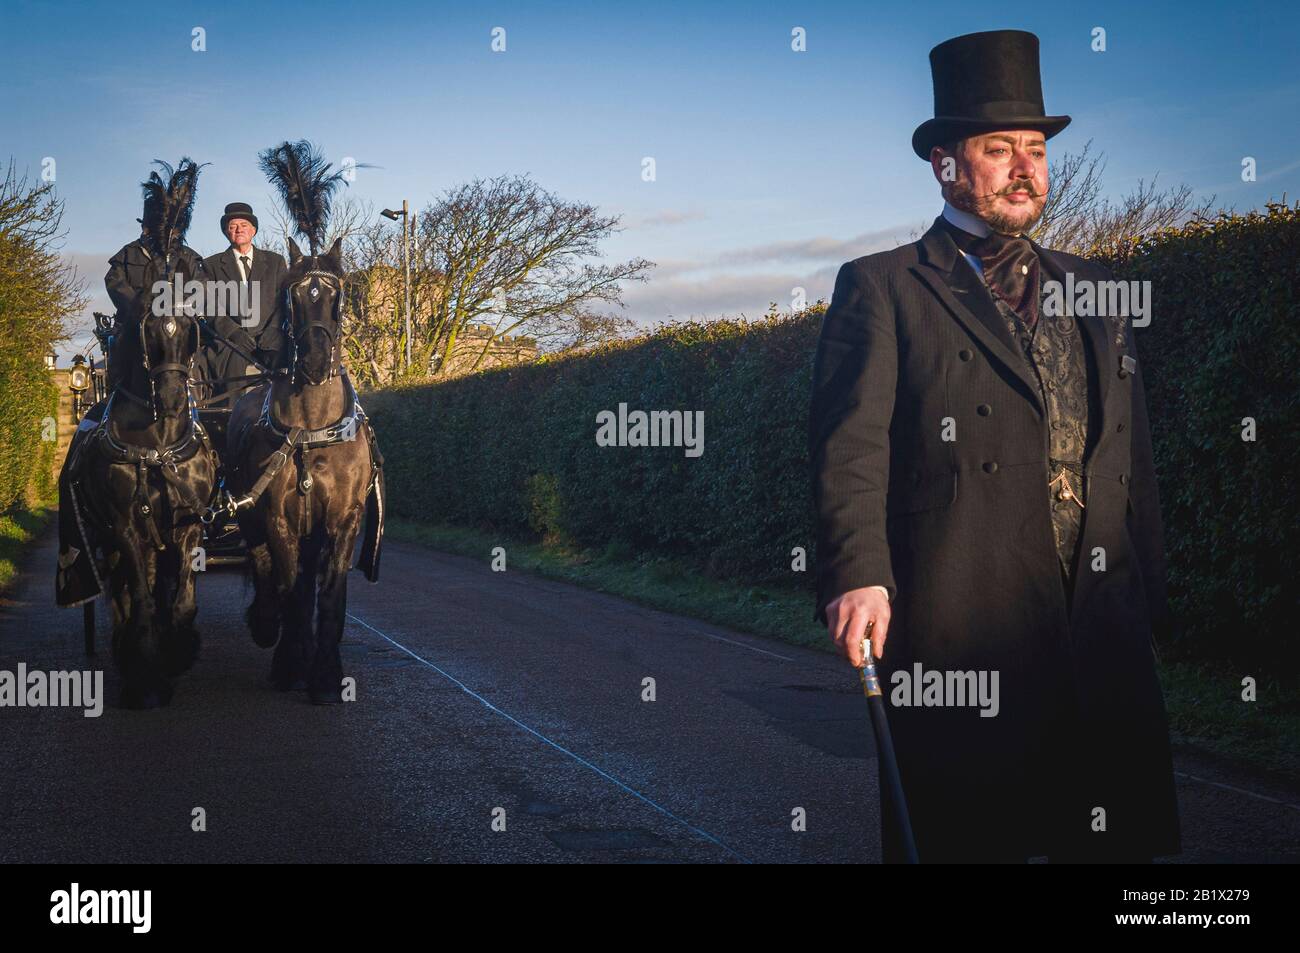 A funeral director, dressed in traditional formal morning dress with top hat, and cane, leads a horse drawn hearse as part of a funeral cortege. Stock Photo